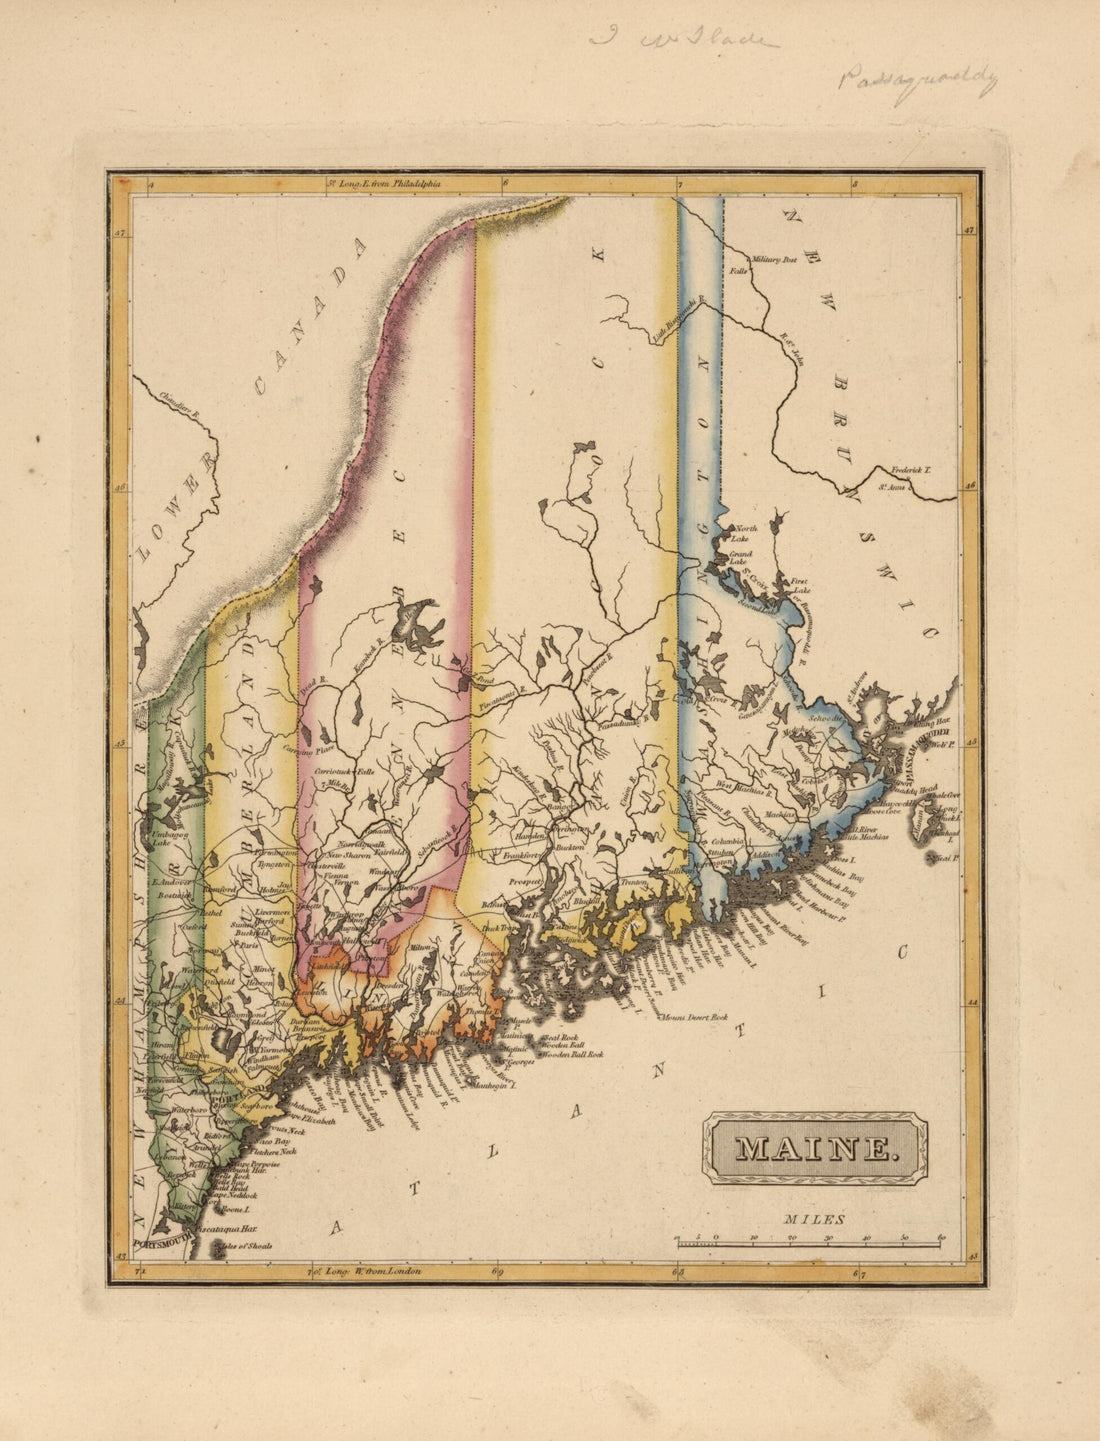 This old map of Maine from a New and Elegant General Atlas, Containing Maps of Each of the United States  from 1817 was created by Henry Schenck Tanner in 1817